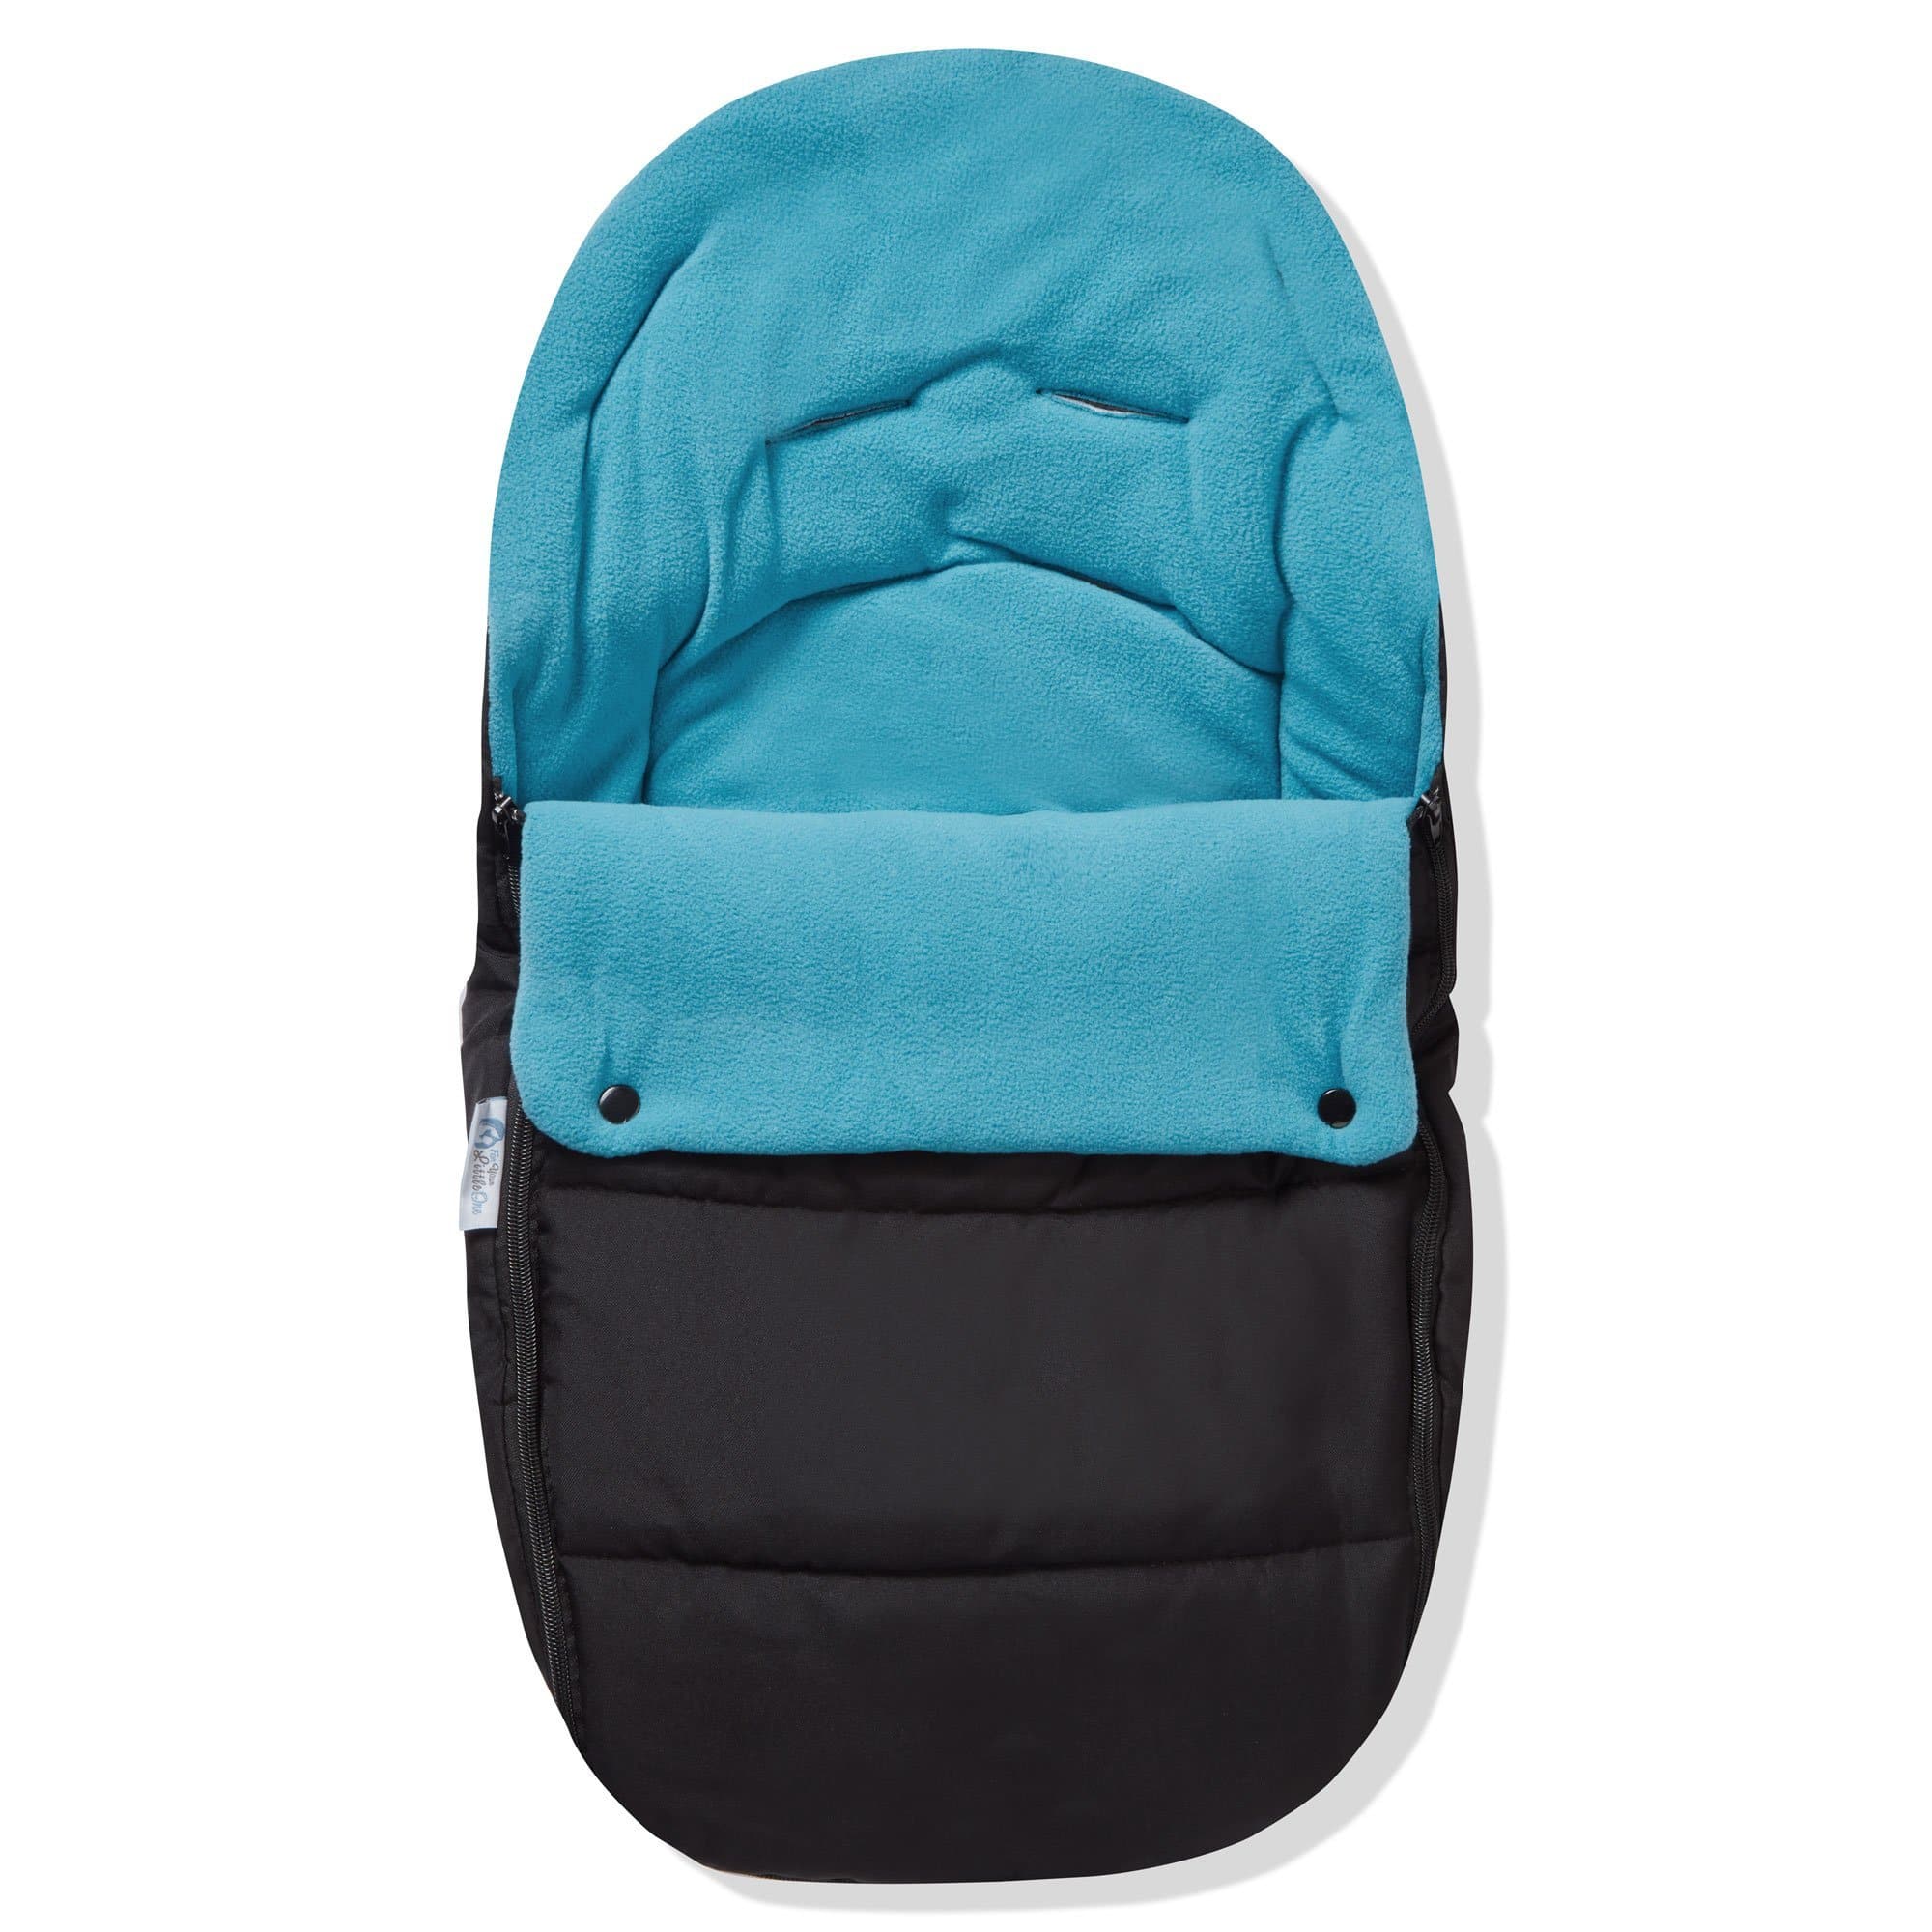 Premium Car Seat Footmuff / Cosy Toes Compatible with Phil & Teds - Ocean Blue / Fits All Models | For Your Little One